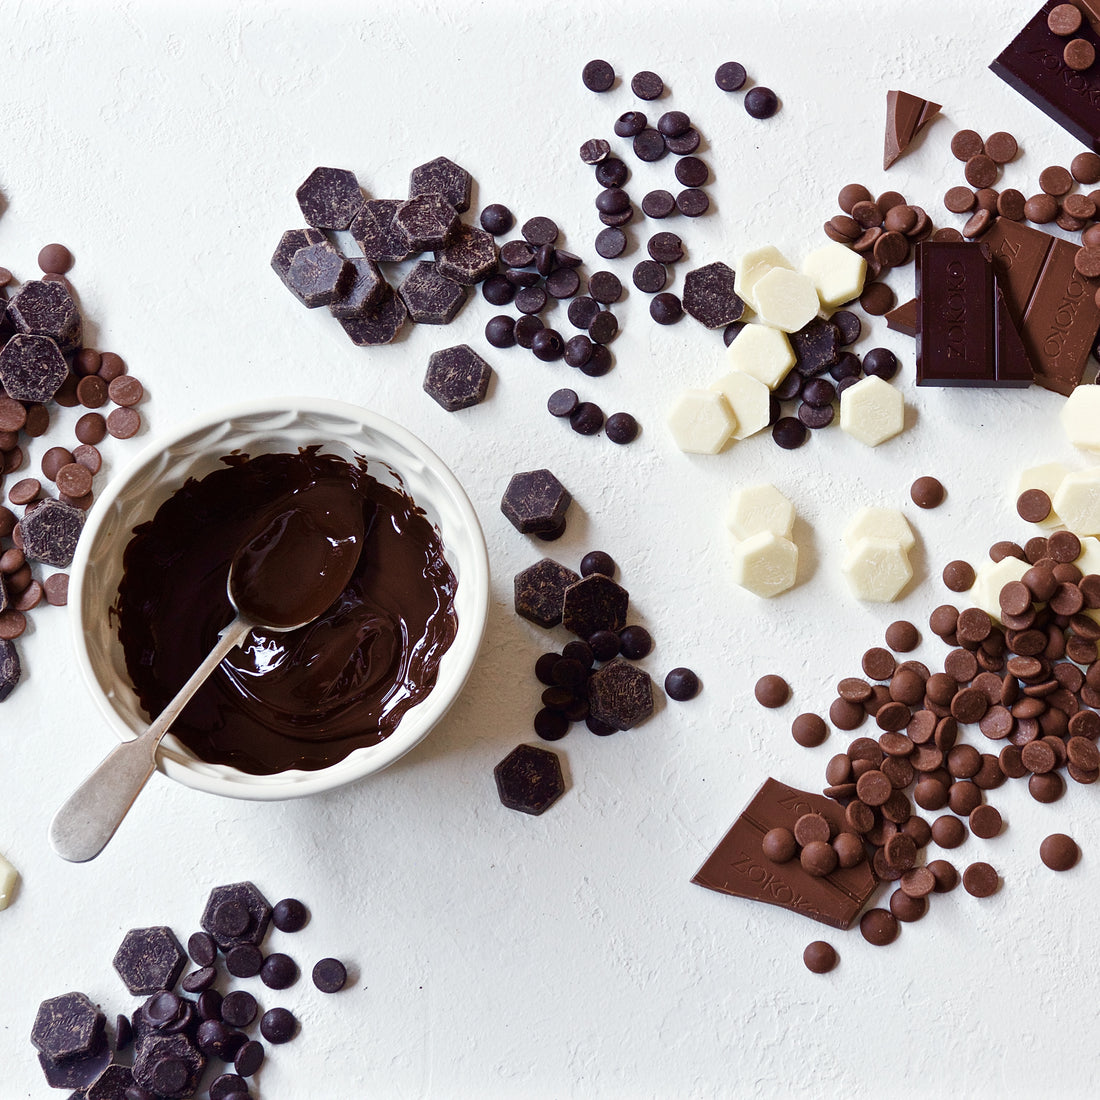 Frequently asked questions about cooking with chocolate